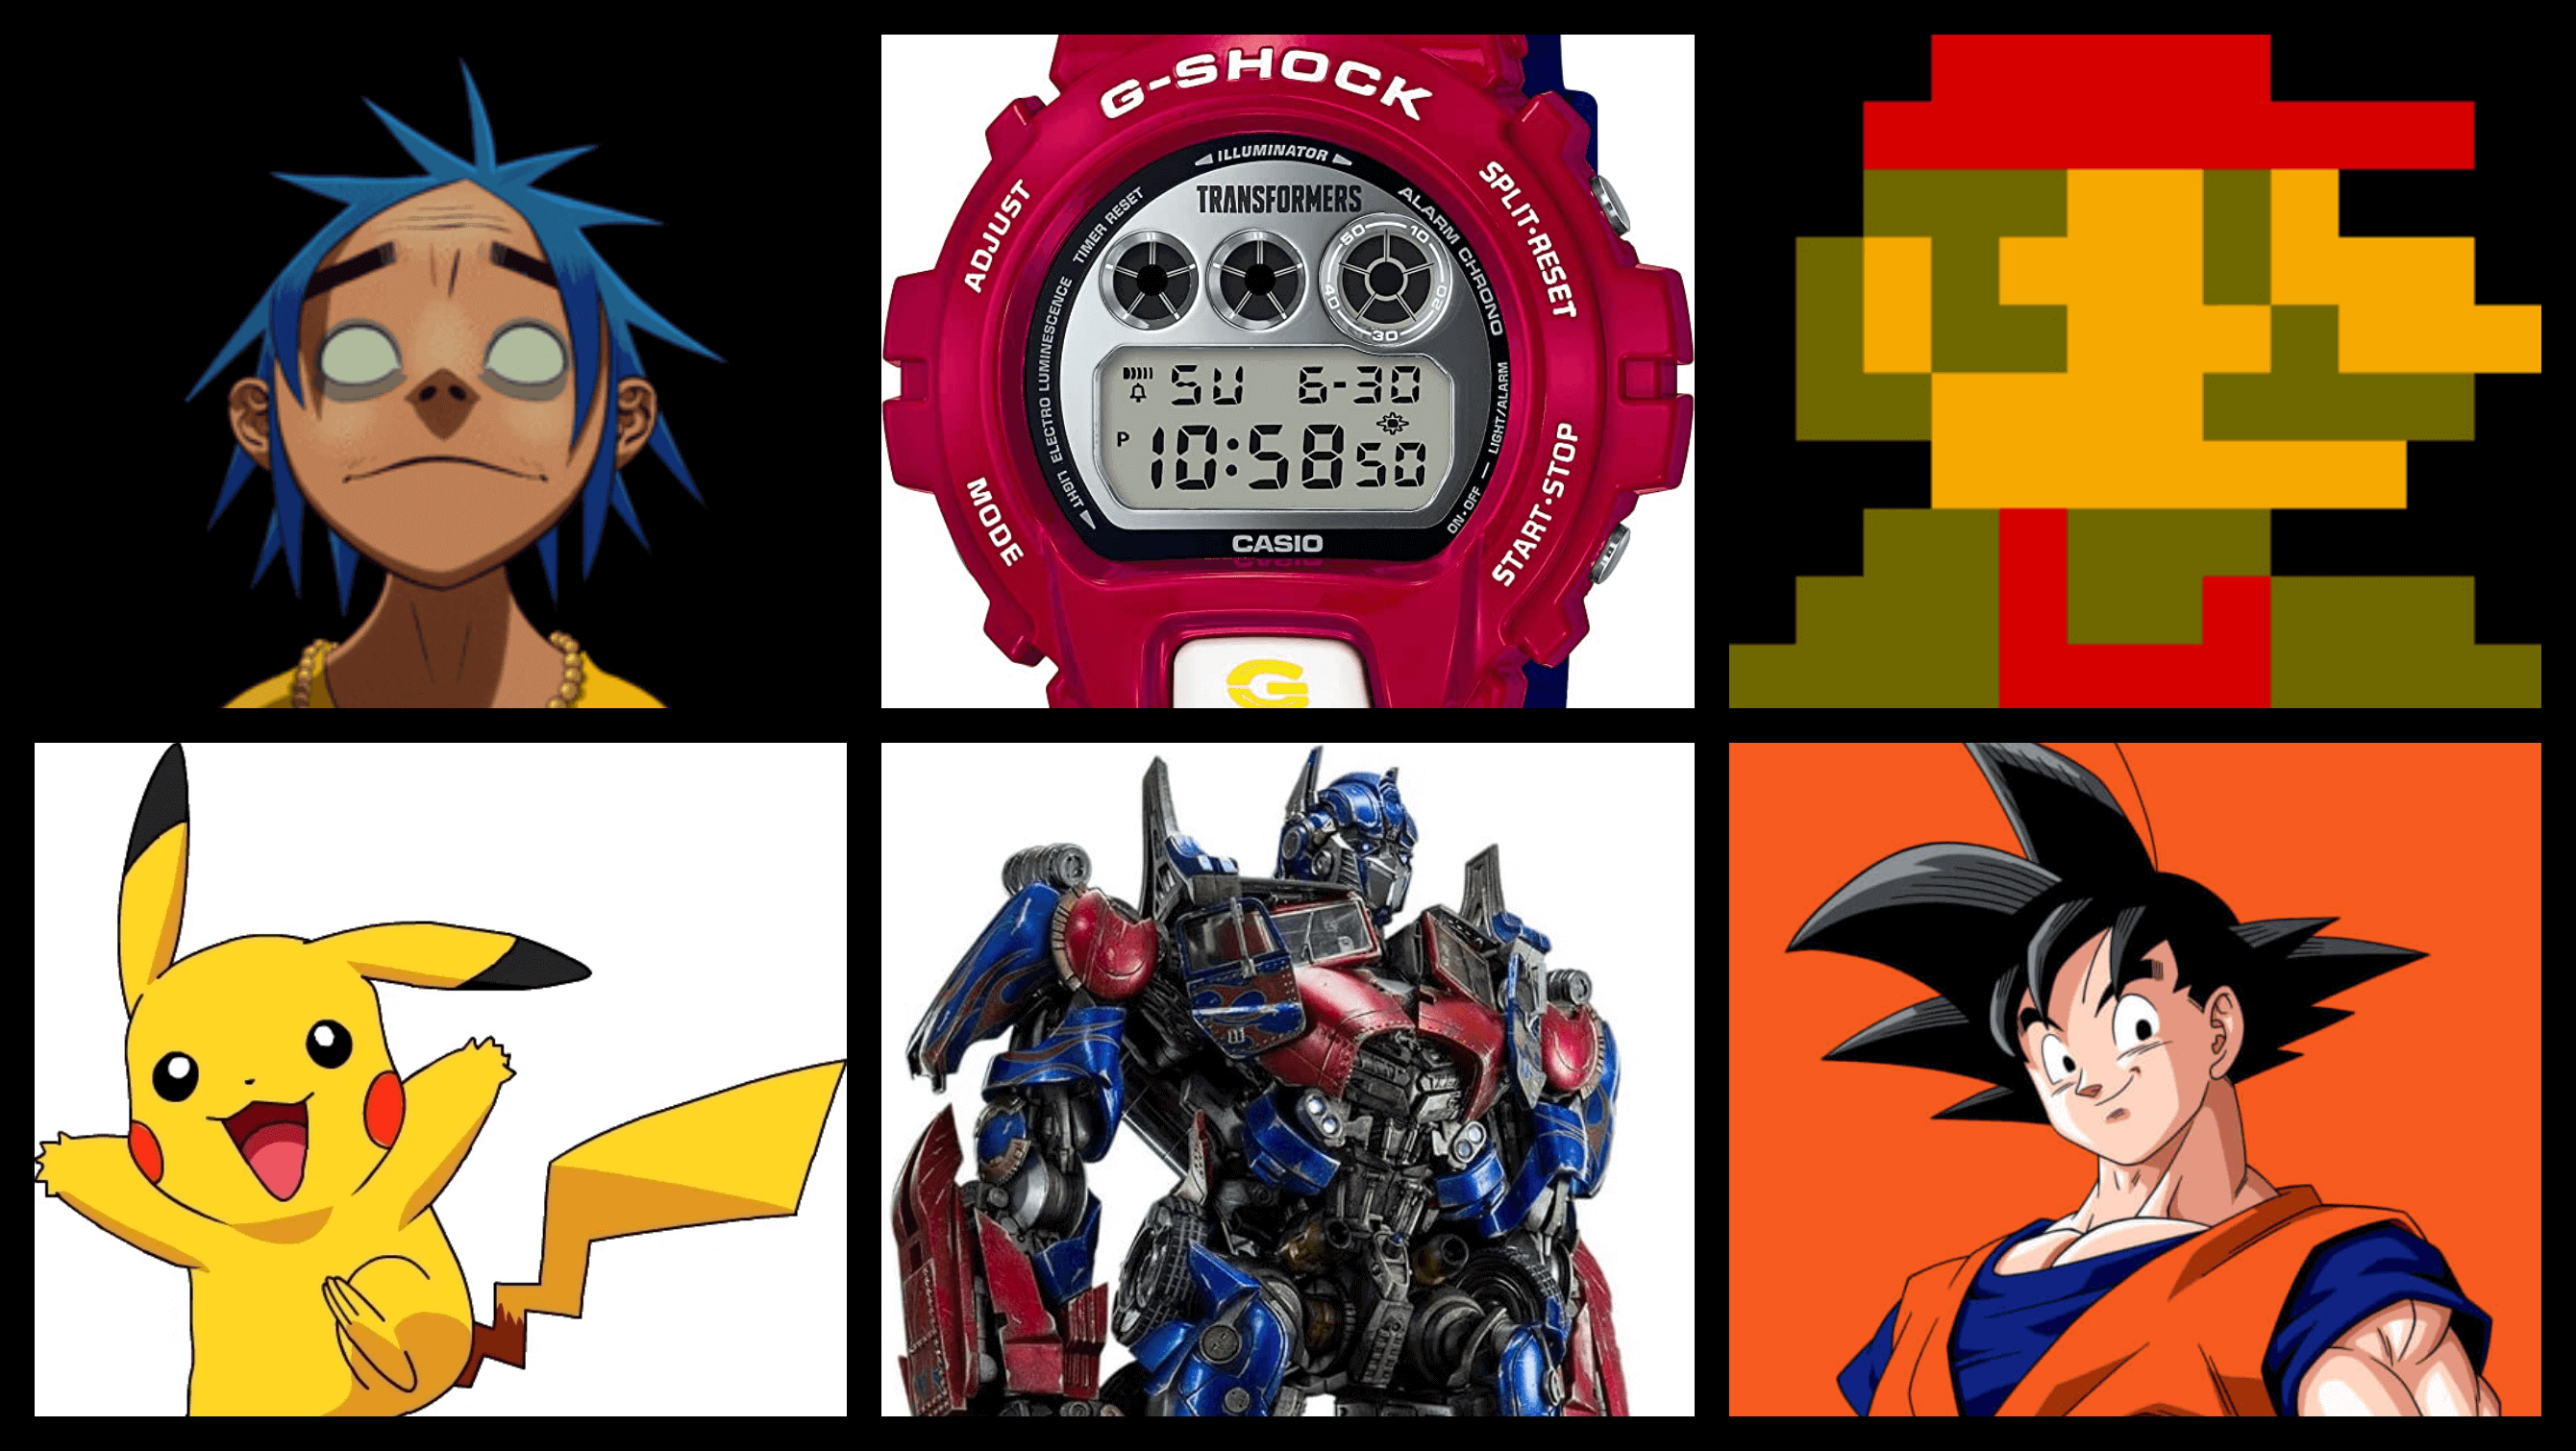 5 of the best limited-edition character G-Shocks